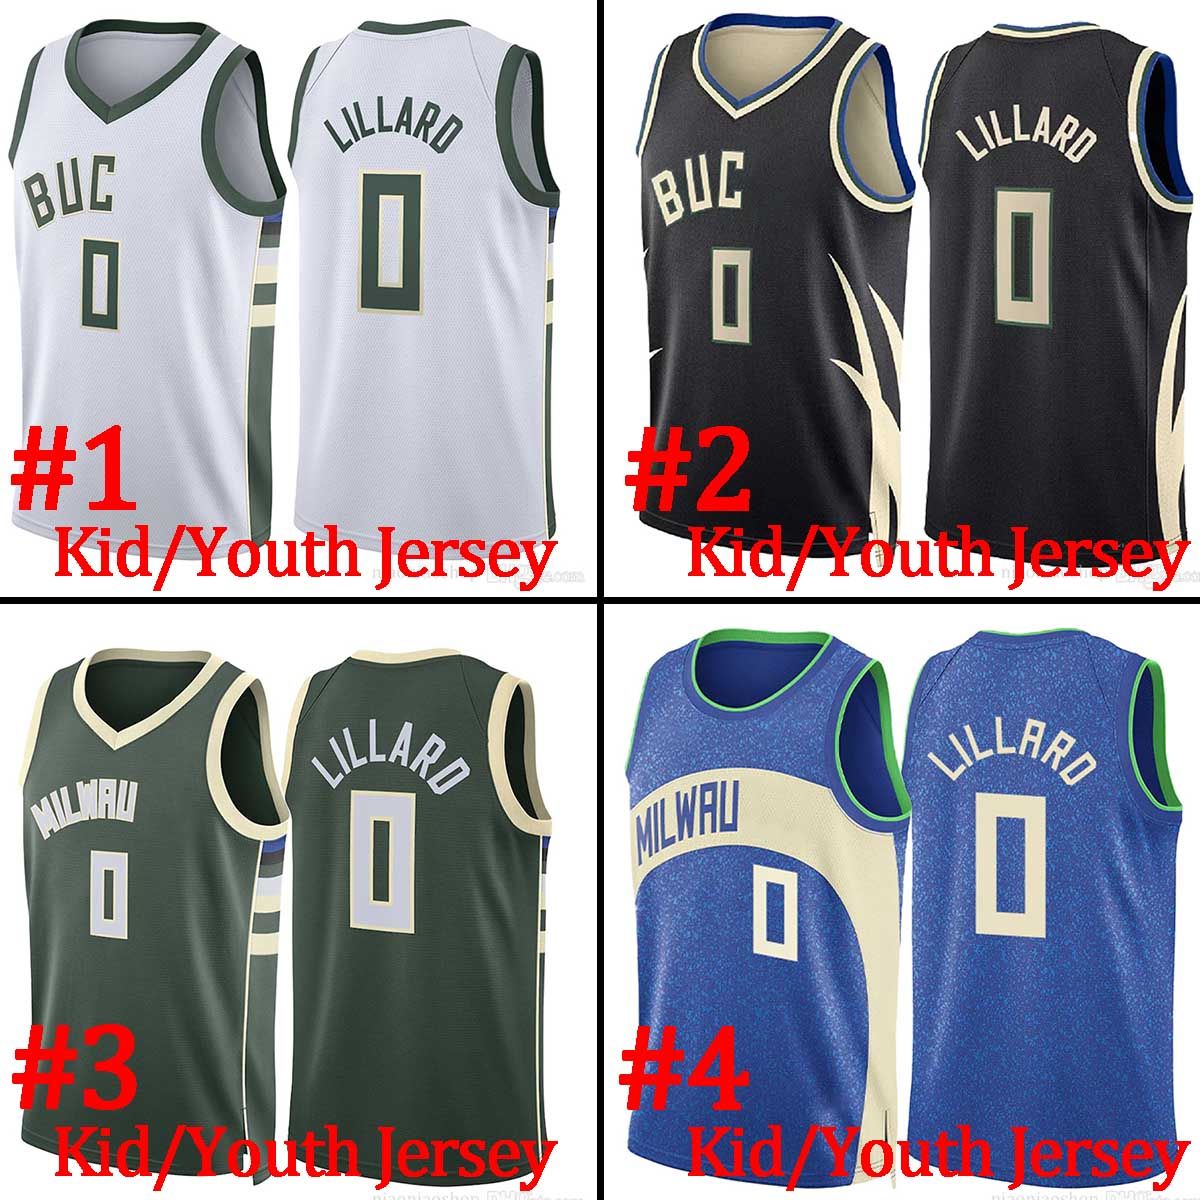 Youth/Kid Jersey-13